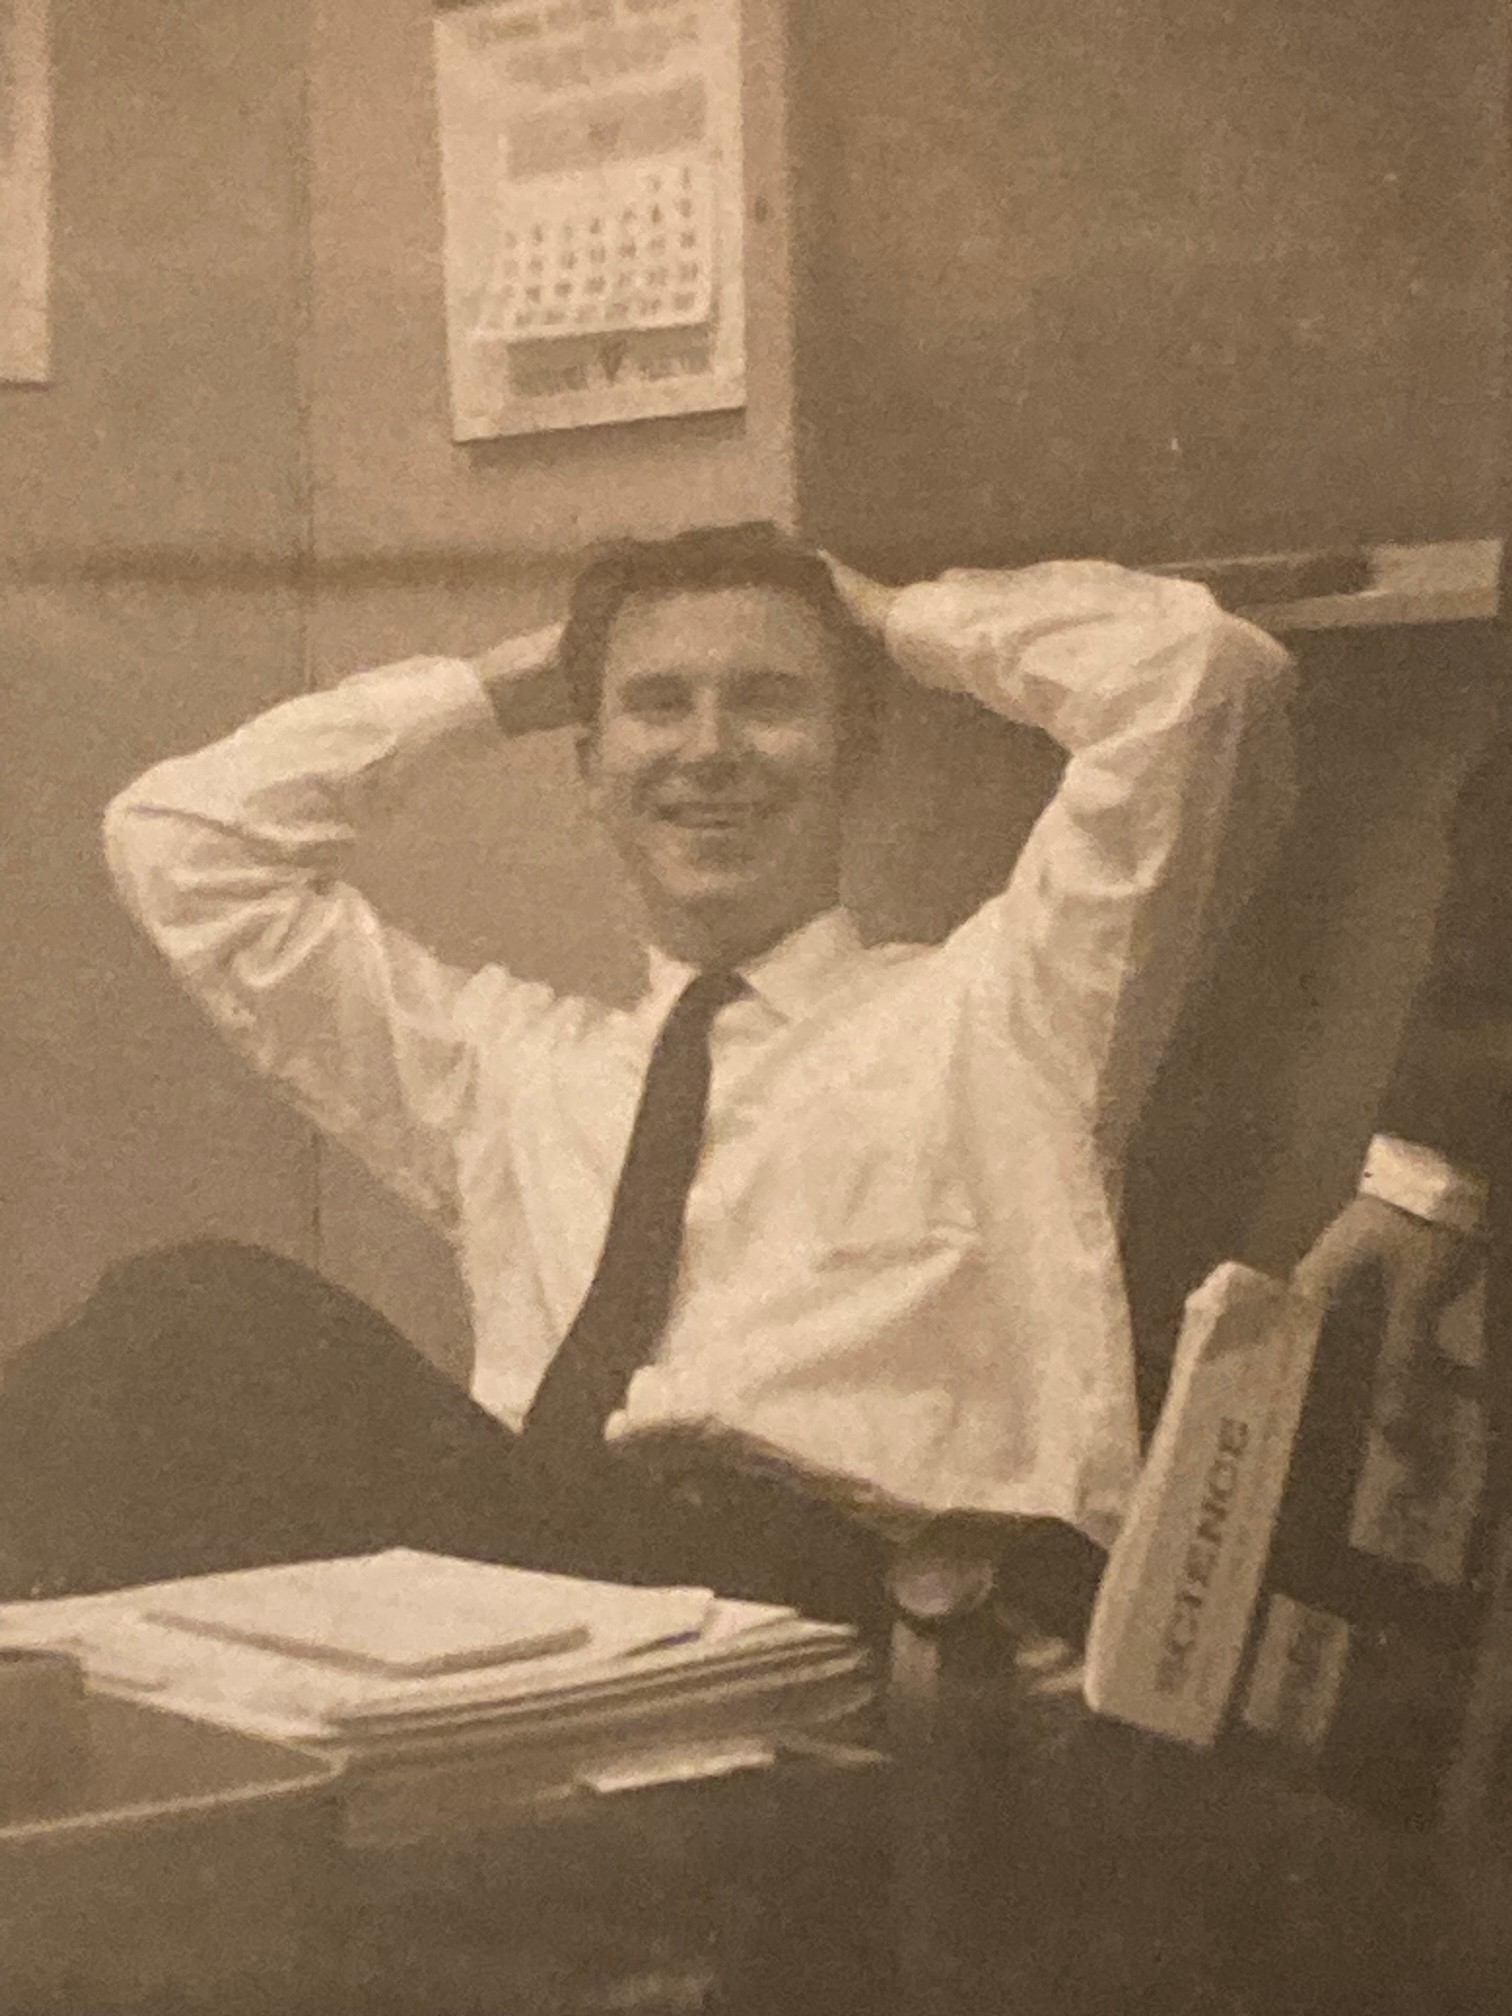 Dr. Sovers in his 20s during his postdoc in New York